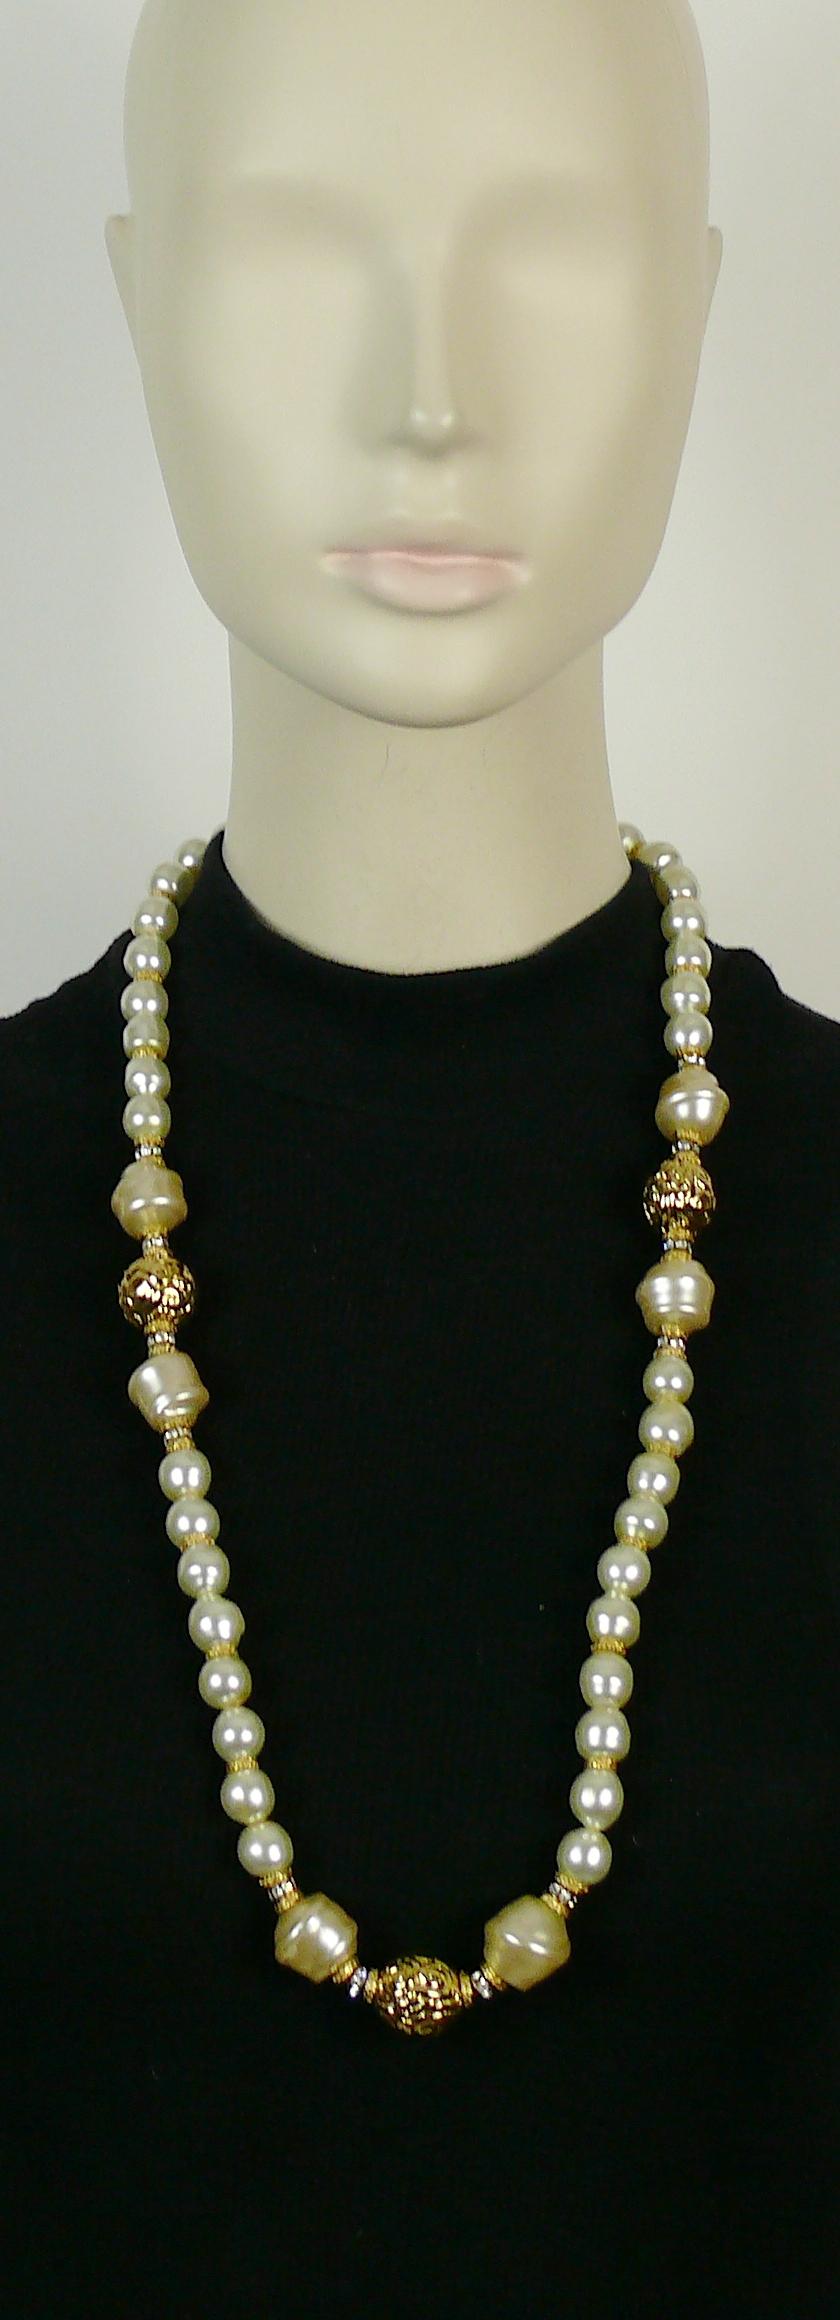 YVES SAINT LAURENT vintage faux necklace featuring irregular shaped faux pearls, gold toned metal beads with arabesques design and clear crystal rondelles.

Lobster clasp closure.

Embossed YSL Made in France.

Indicative measurements : length